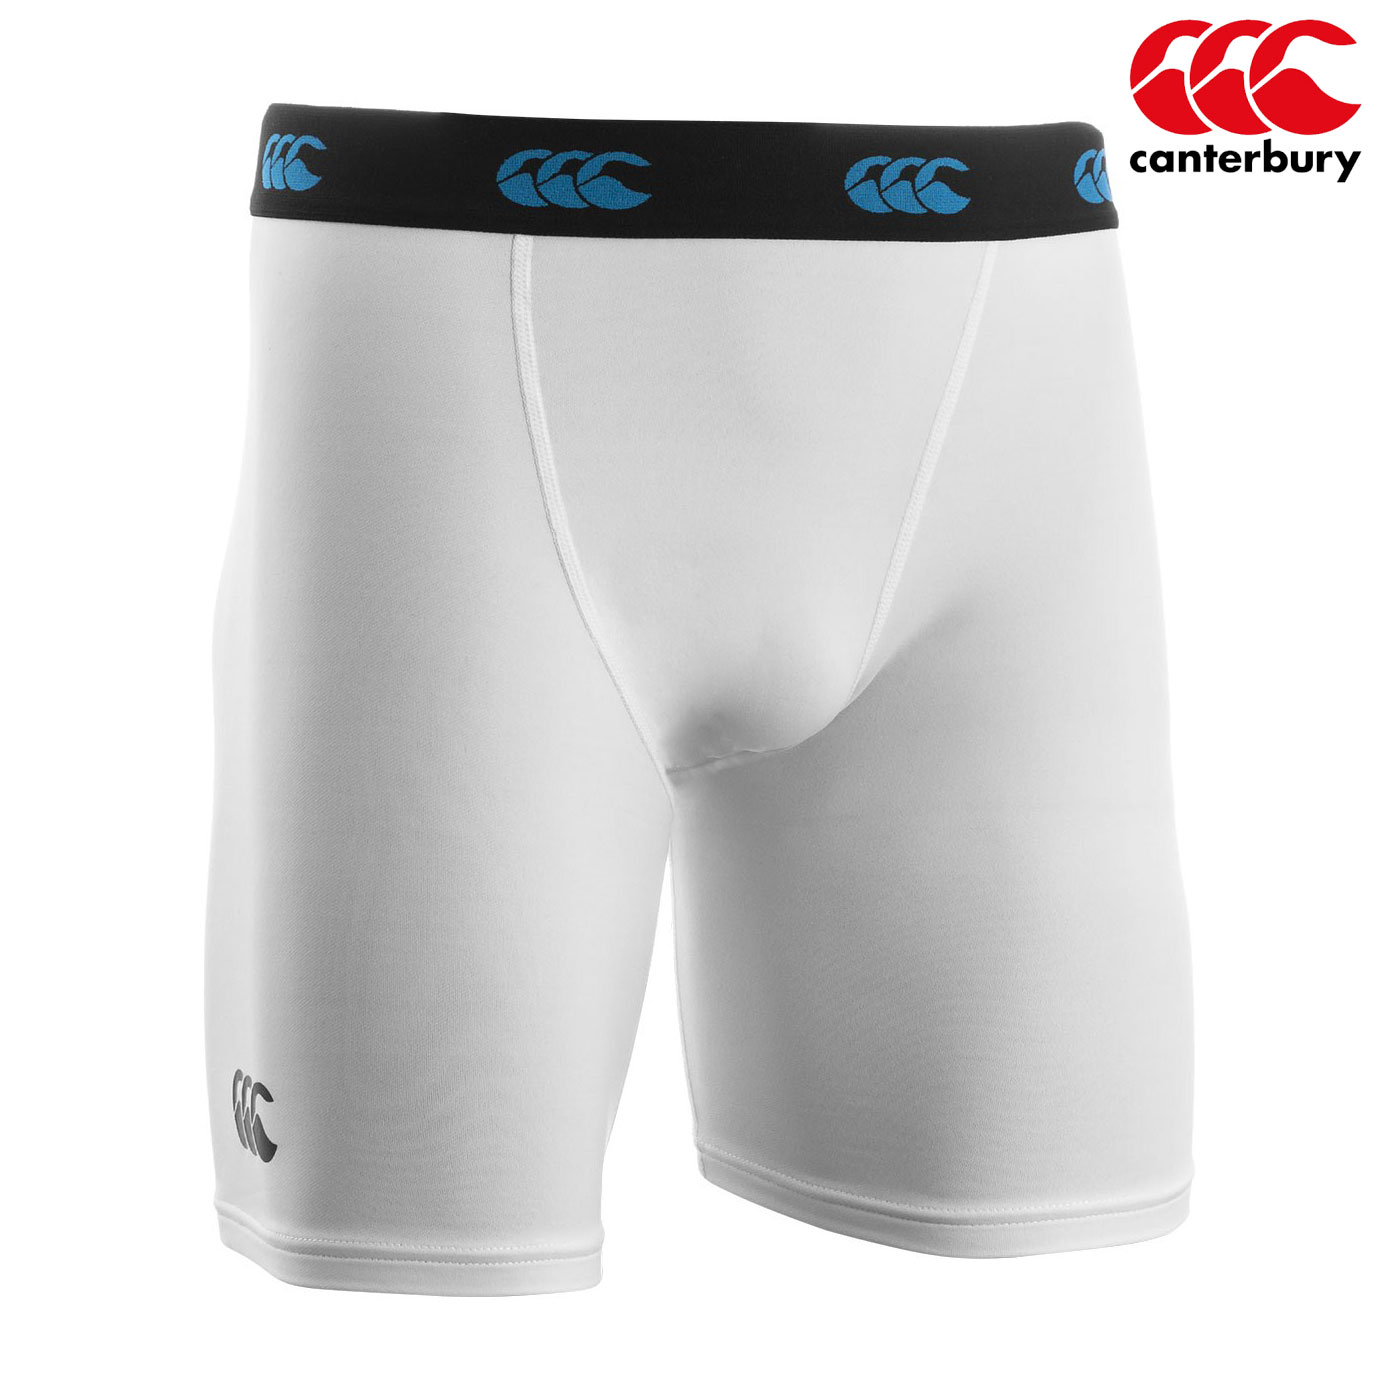 Canterbury Men's Baselayer Short 00B for Football-Rugby White Cold £ 19.99